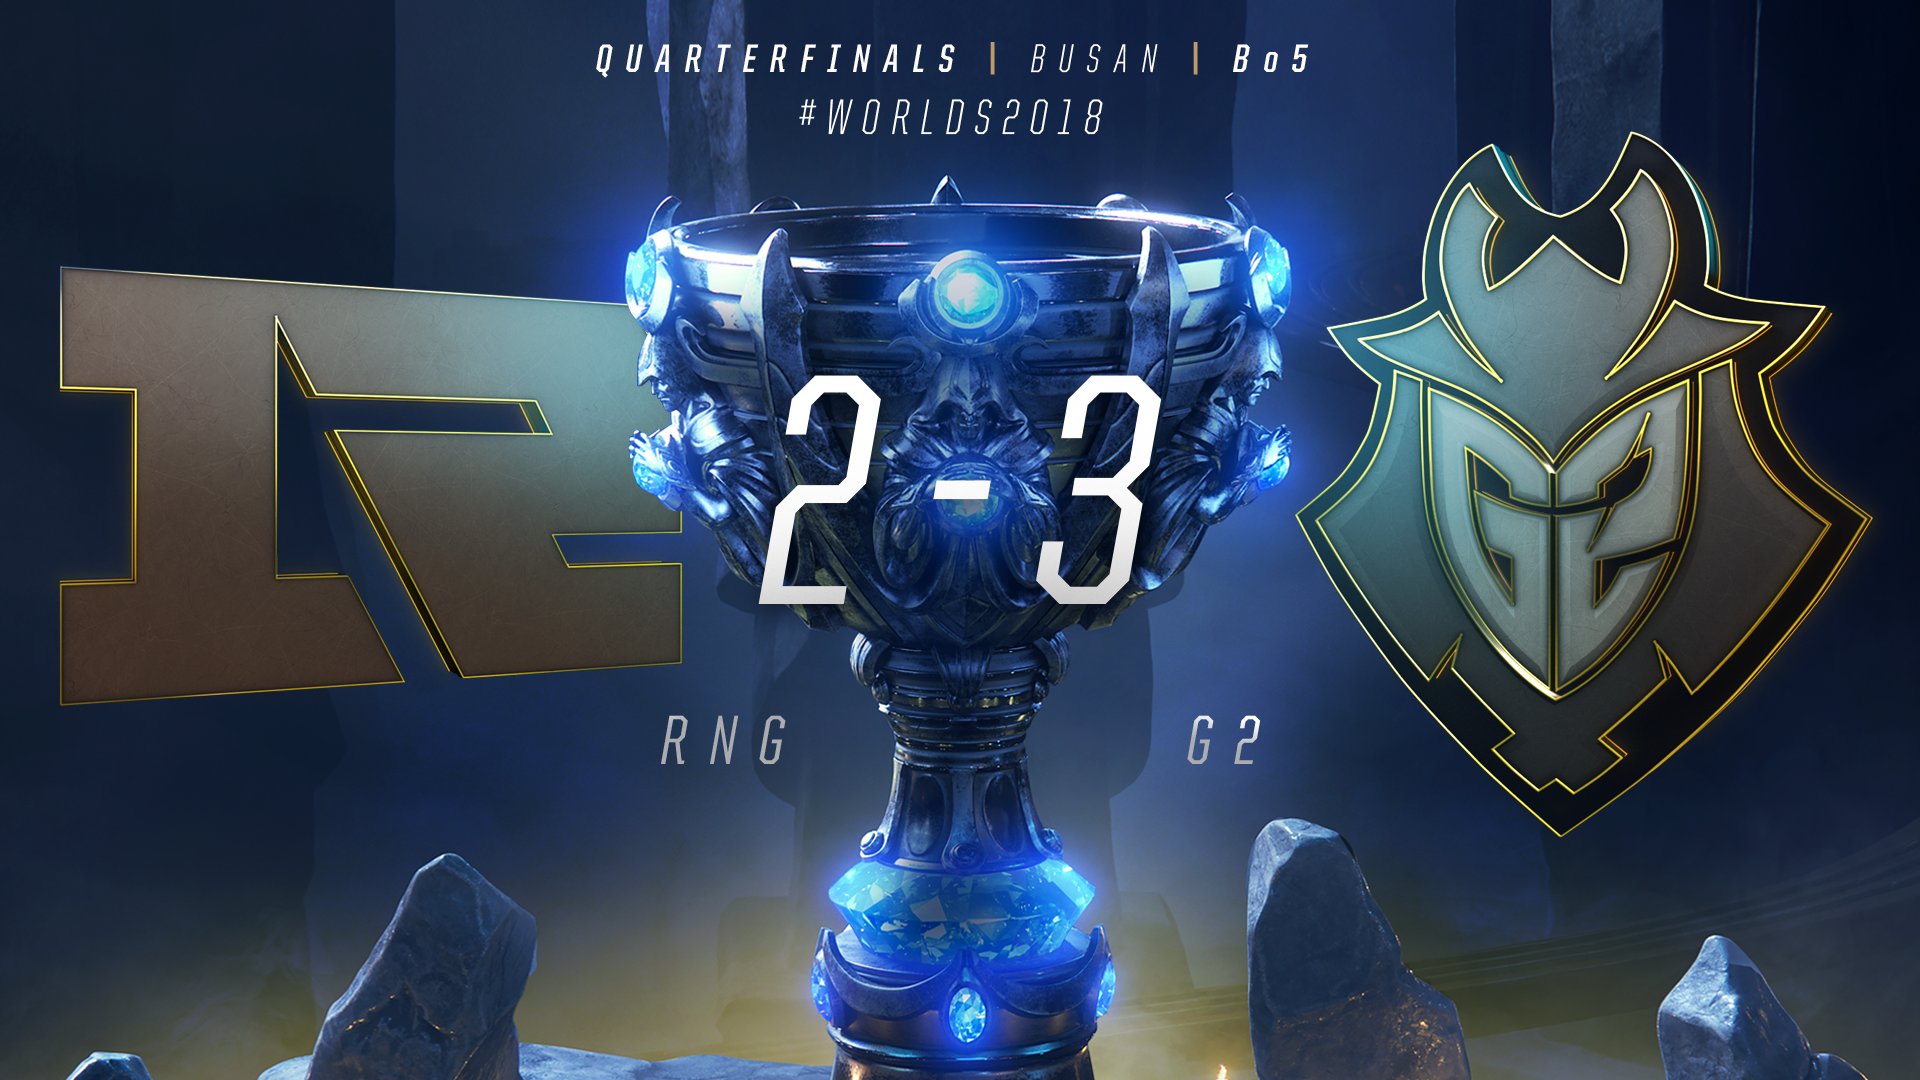 LoL Esports on X: WHAT A SERIES! @G2esports TAKE DOWN @RNGRoyal IN THE # WORLDS2018 QUARTERFINALS! #G2WIN  / X